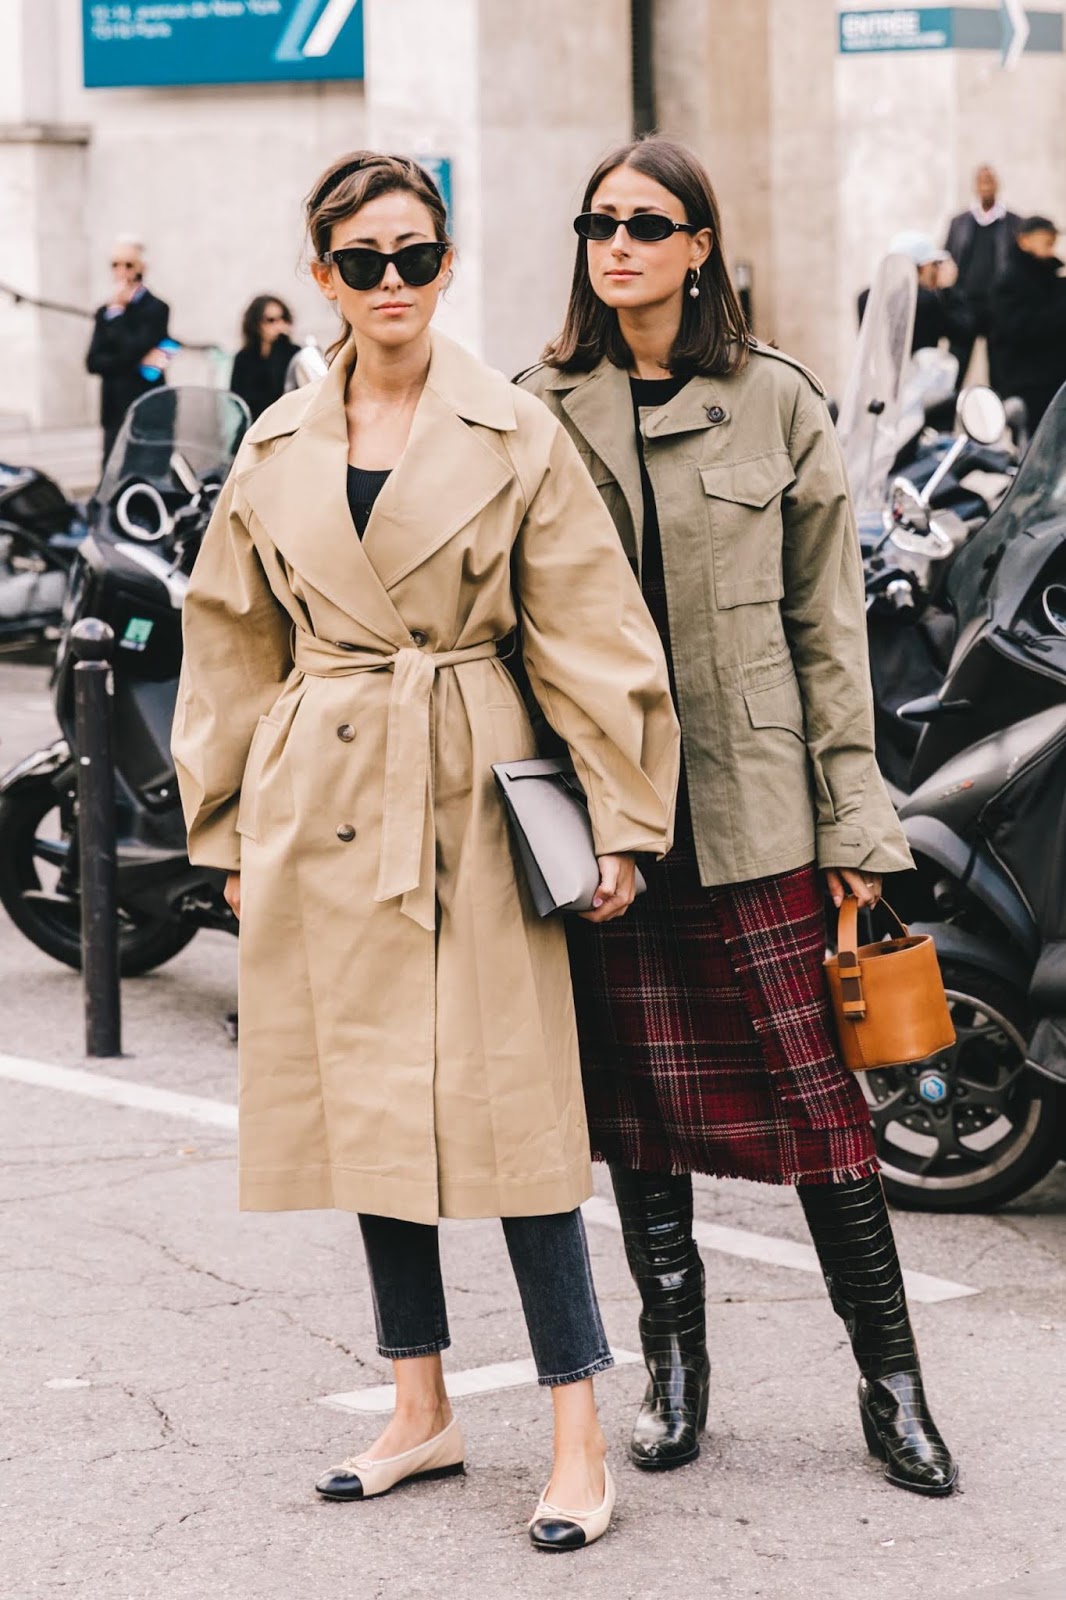 2 Insanely Chic Fall Outfit Ideas to Try Now